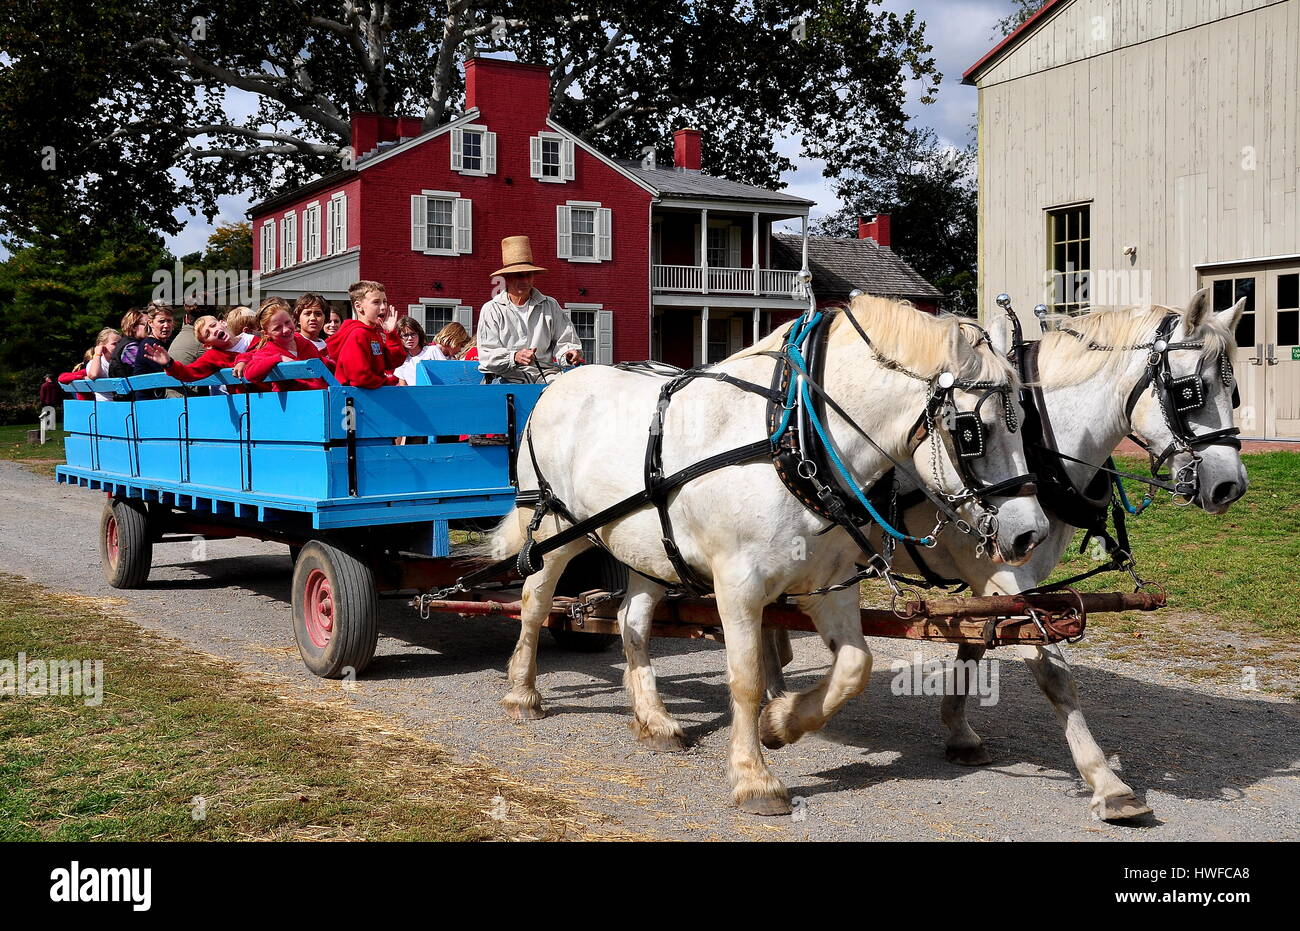 Lancaster, Pennsylvania - October 14, 2015:  School children riding in a wagon pulled by two white horses at the Landis Valley Village and Farm Museum Stock Photo